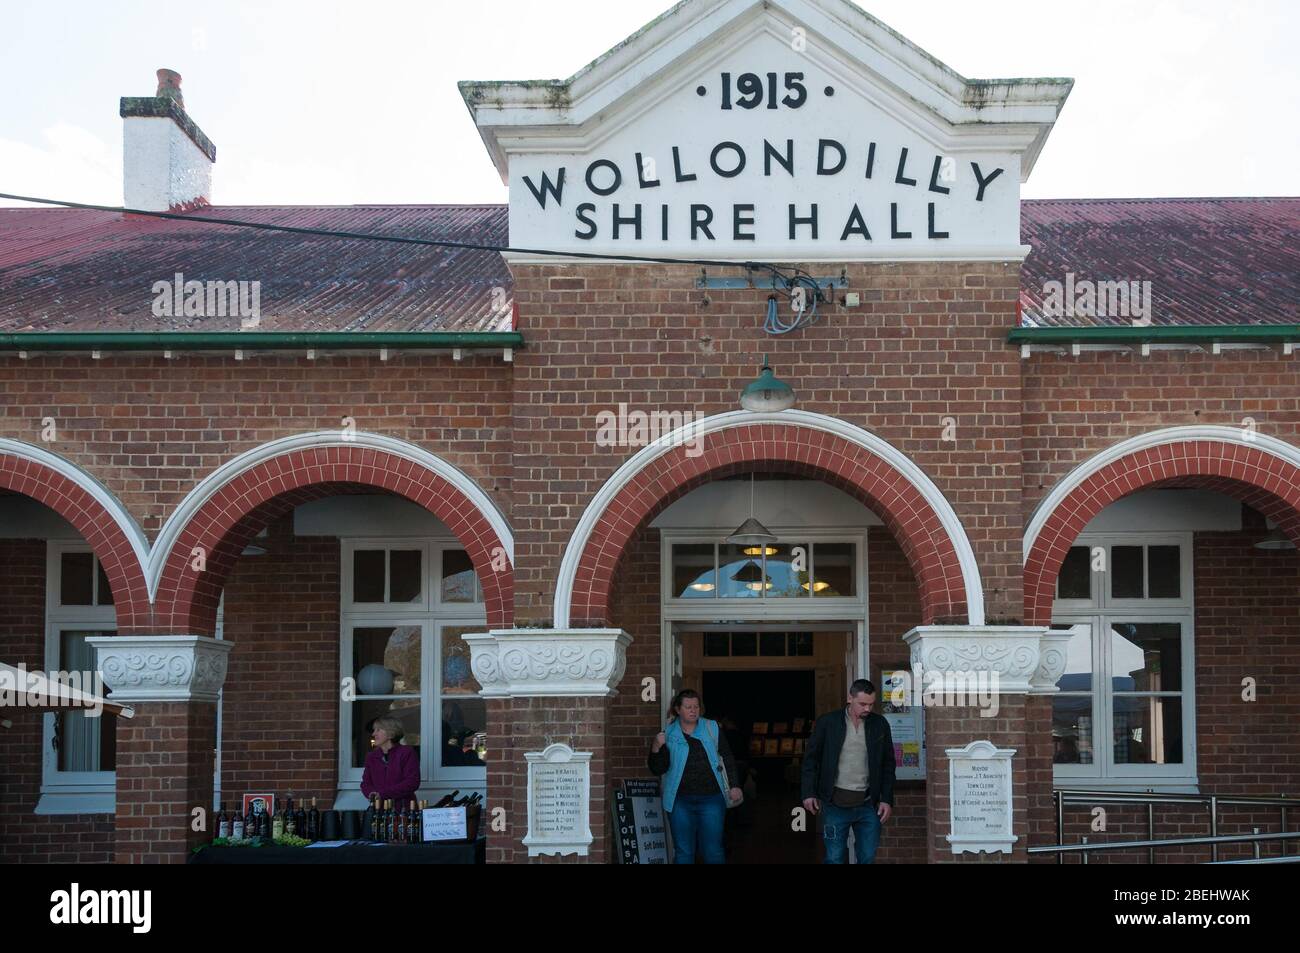 Picton, Australia - August 07, 2011: Wollondilly Shire Hall building in Picton regional town in Australia Stock Photo